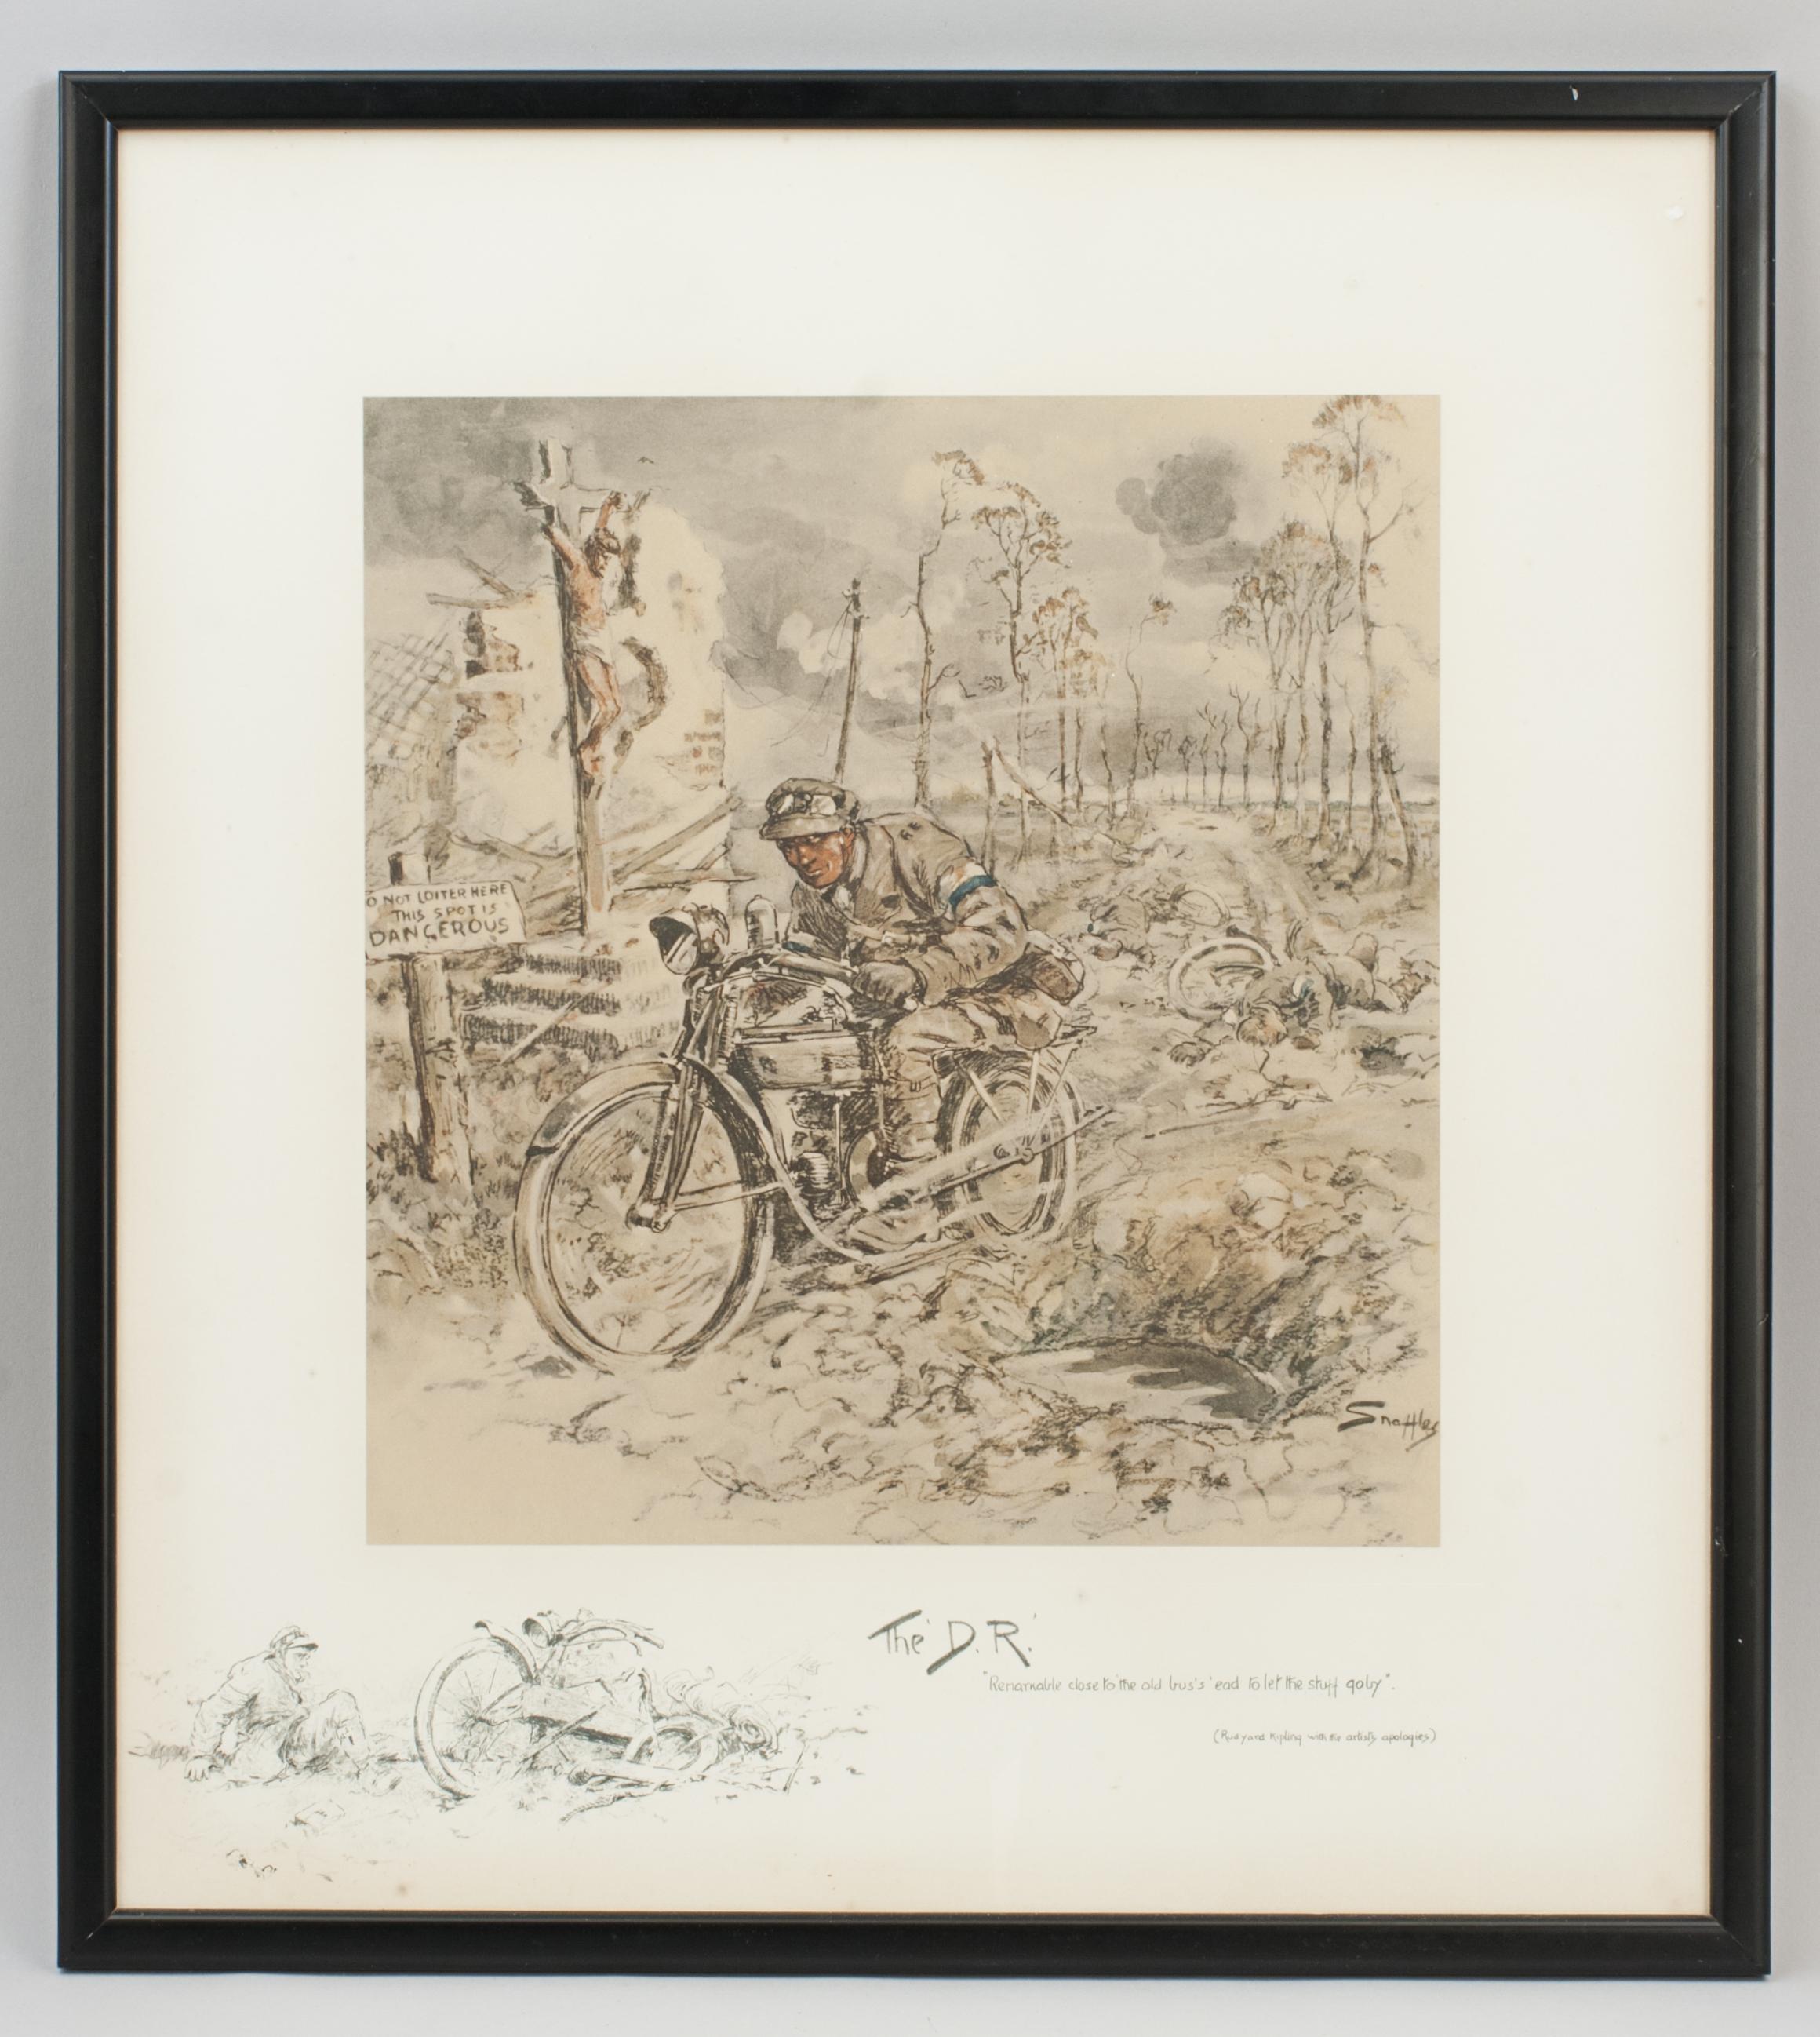 Vintage Snaffles WWI Military Print, The D.R.
A good hand coloured Snaffles WWI military print 'The D.R.'. The lithograph shows a despatch rider on a motor cycle, racing past two dead riders in the road, a sign saying 